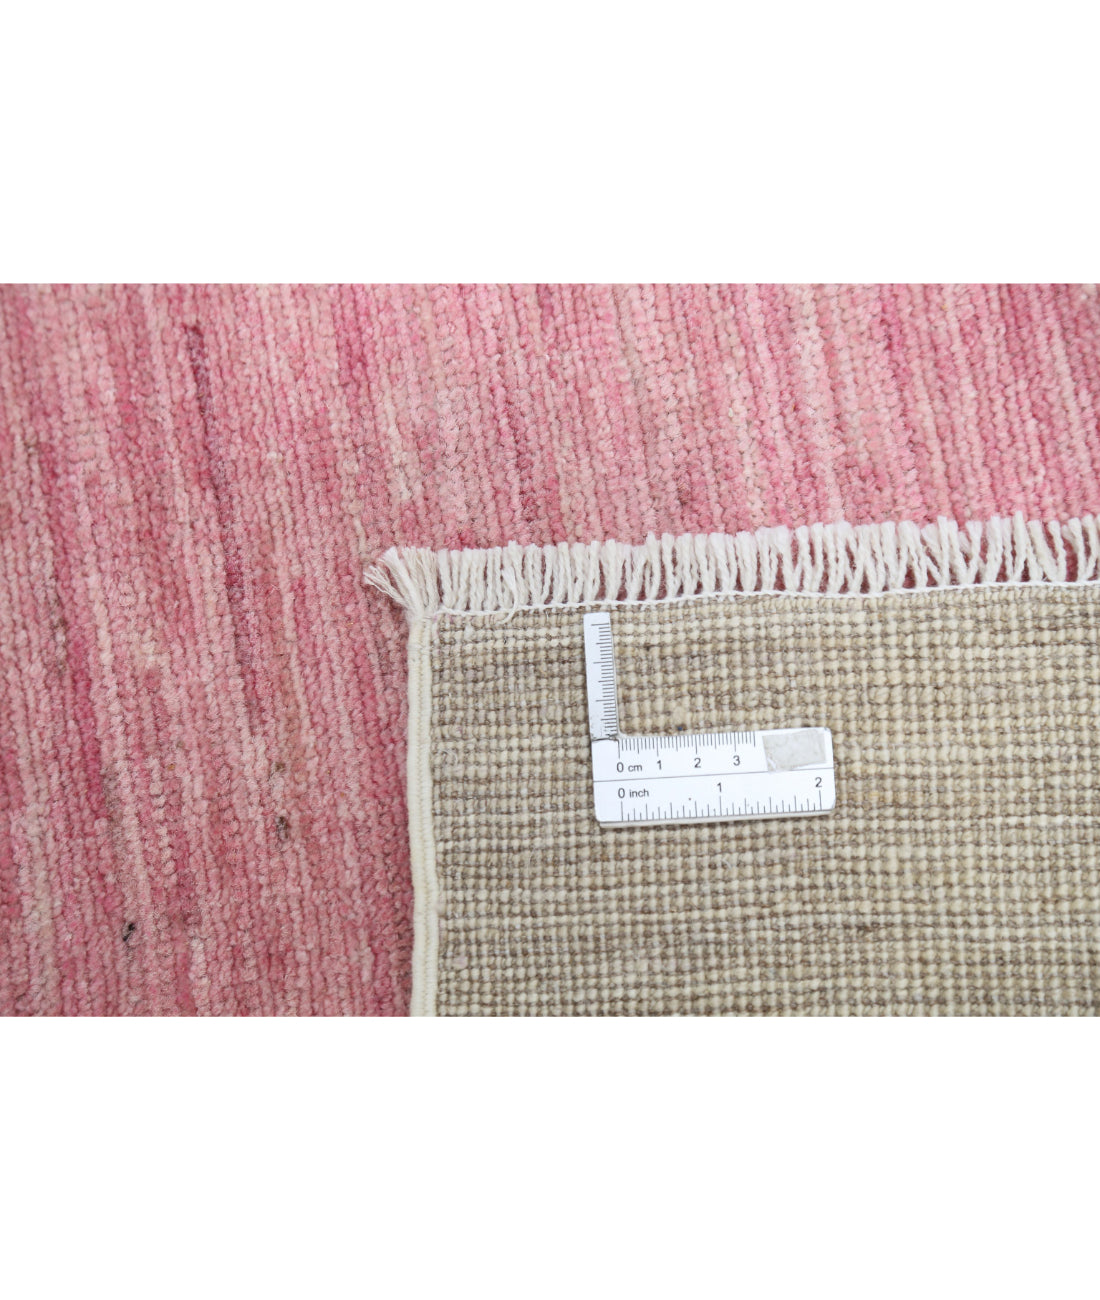 Chinese 9'2'' X 11'10'' Hand-Knotted Wool Rug 9'2'' x 11'10'' (275 X 355) / Ivory / Pink